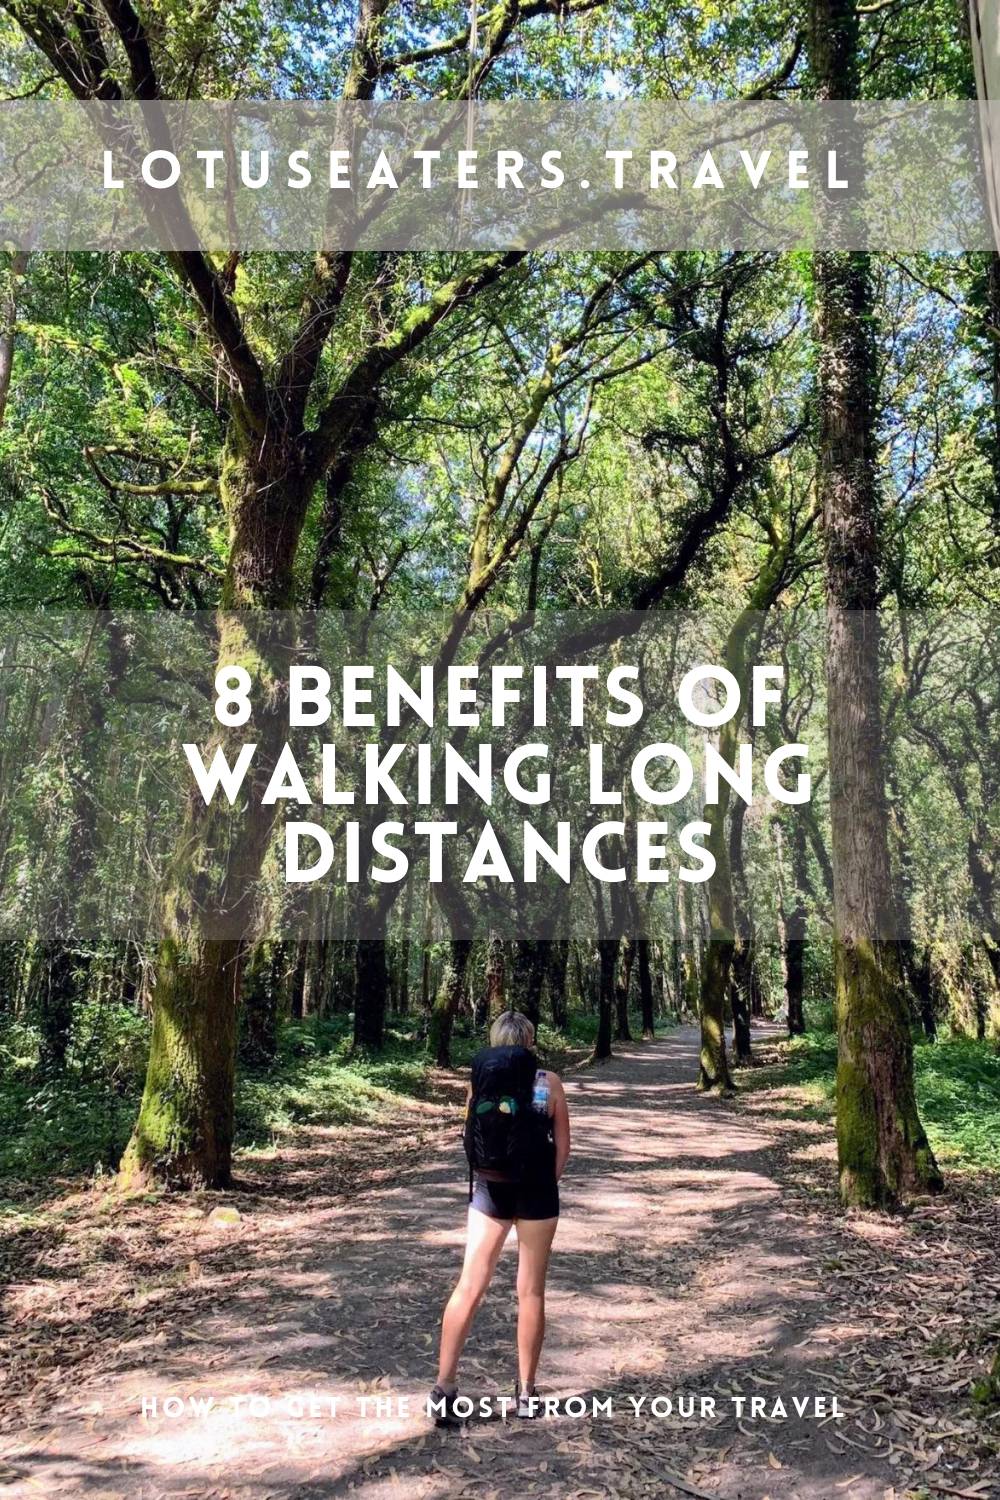 8 benefits of walking long distances from a professional walker